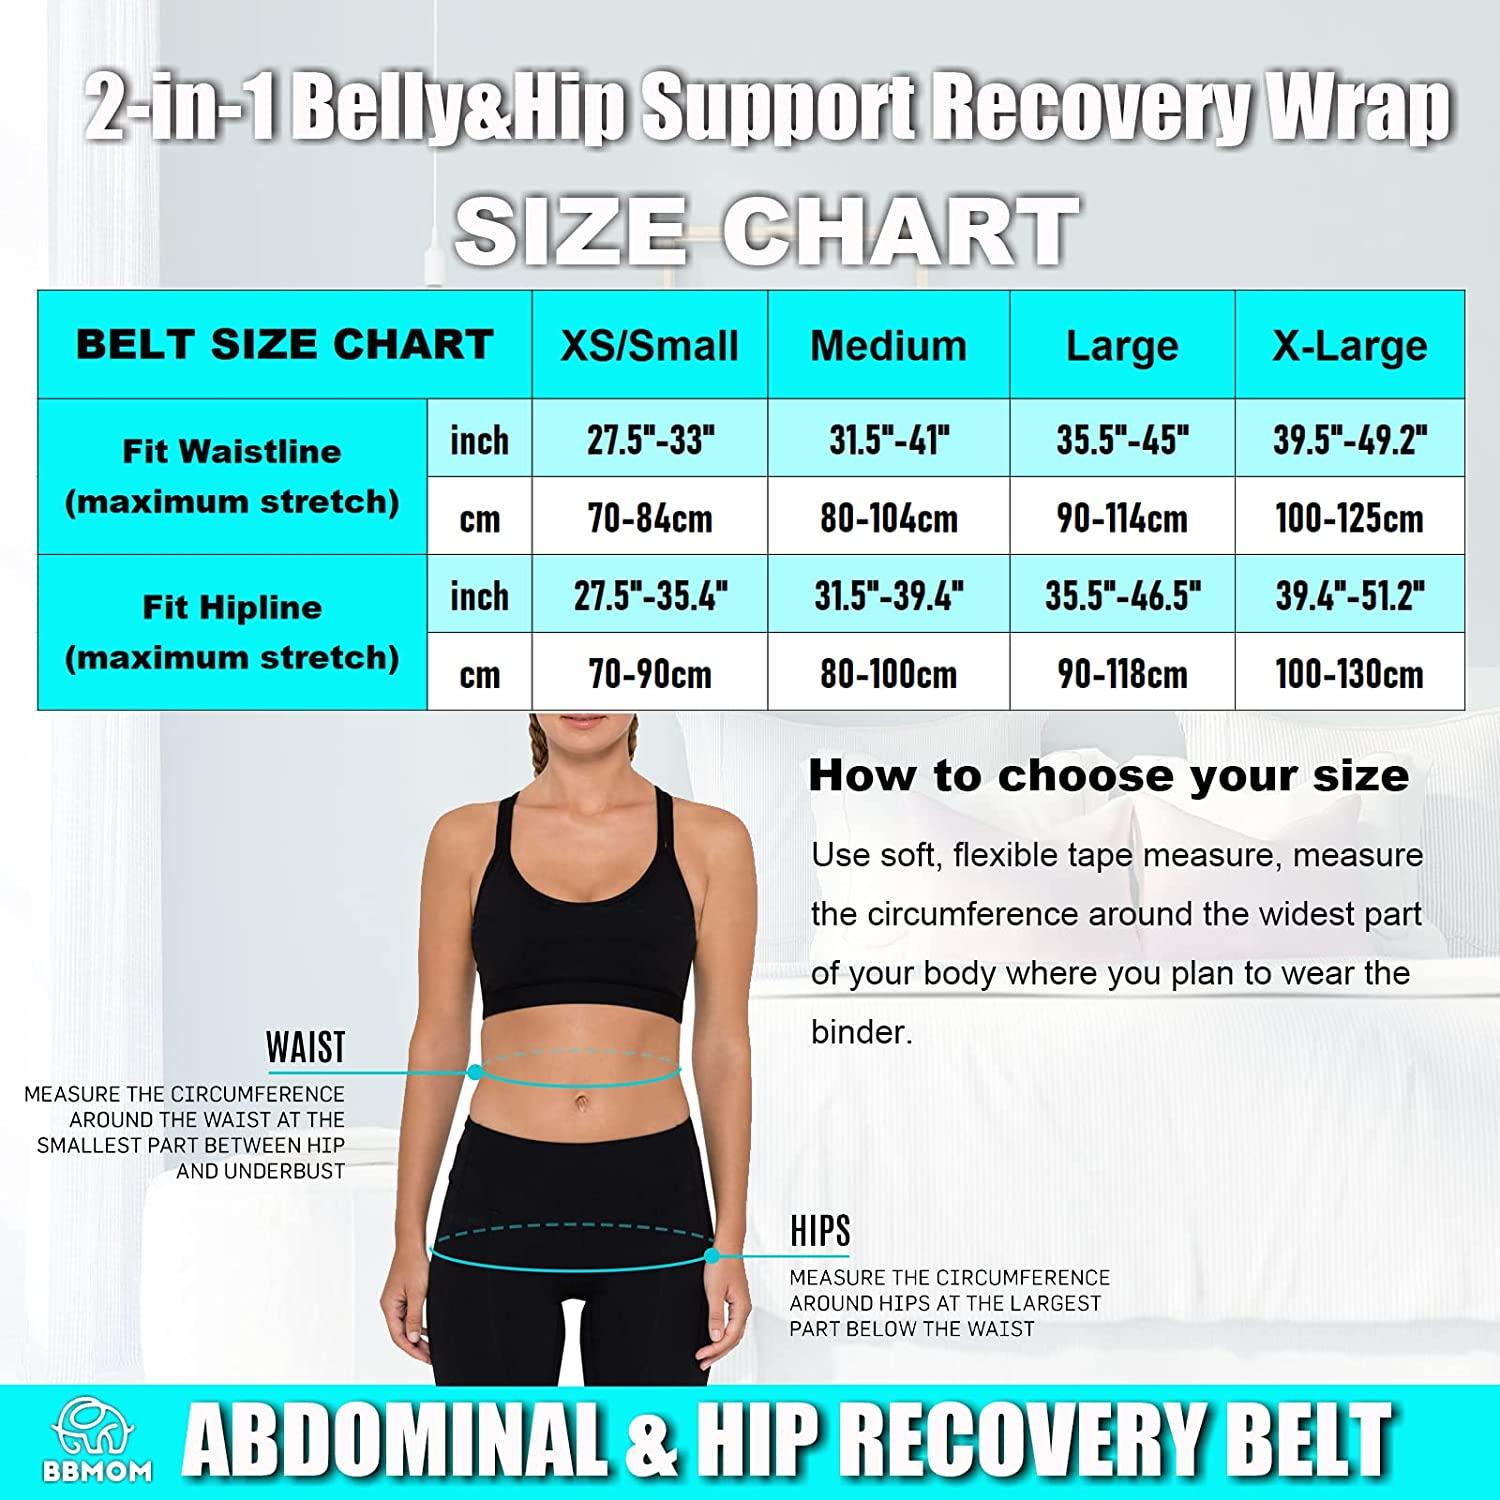 Postpartum Belly Band Wrap 3 in 1 Belt - C section Recovery